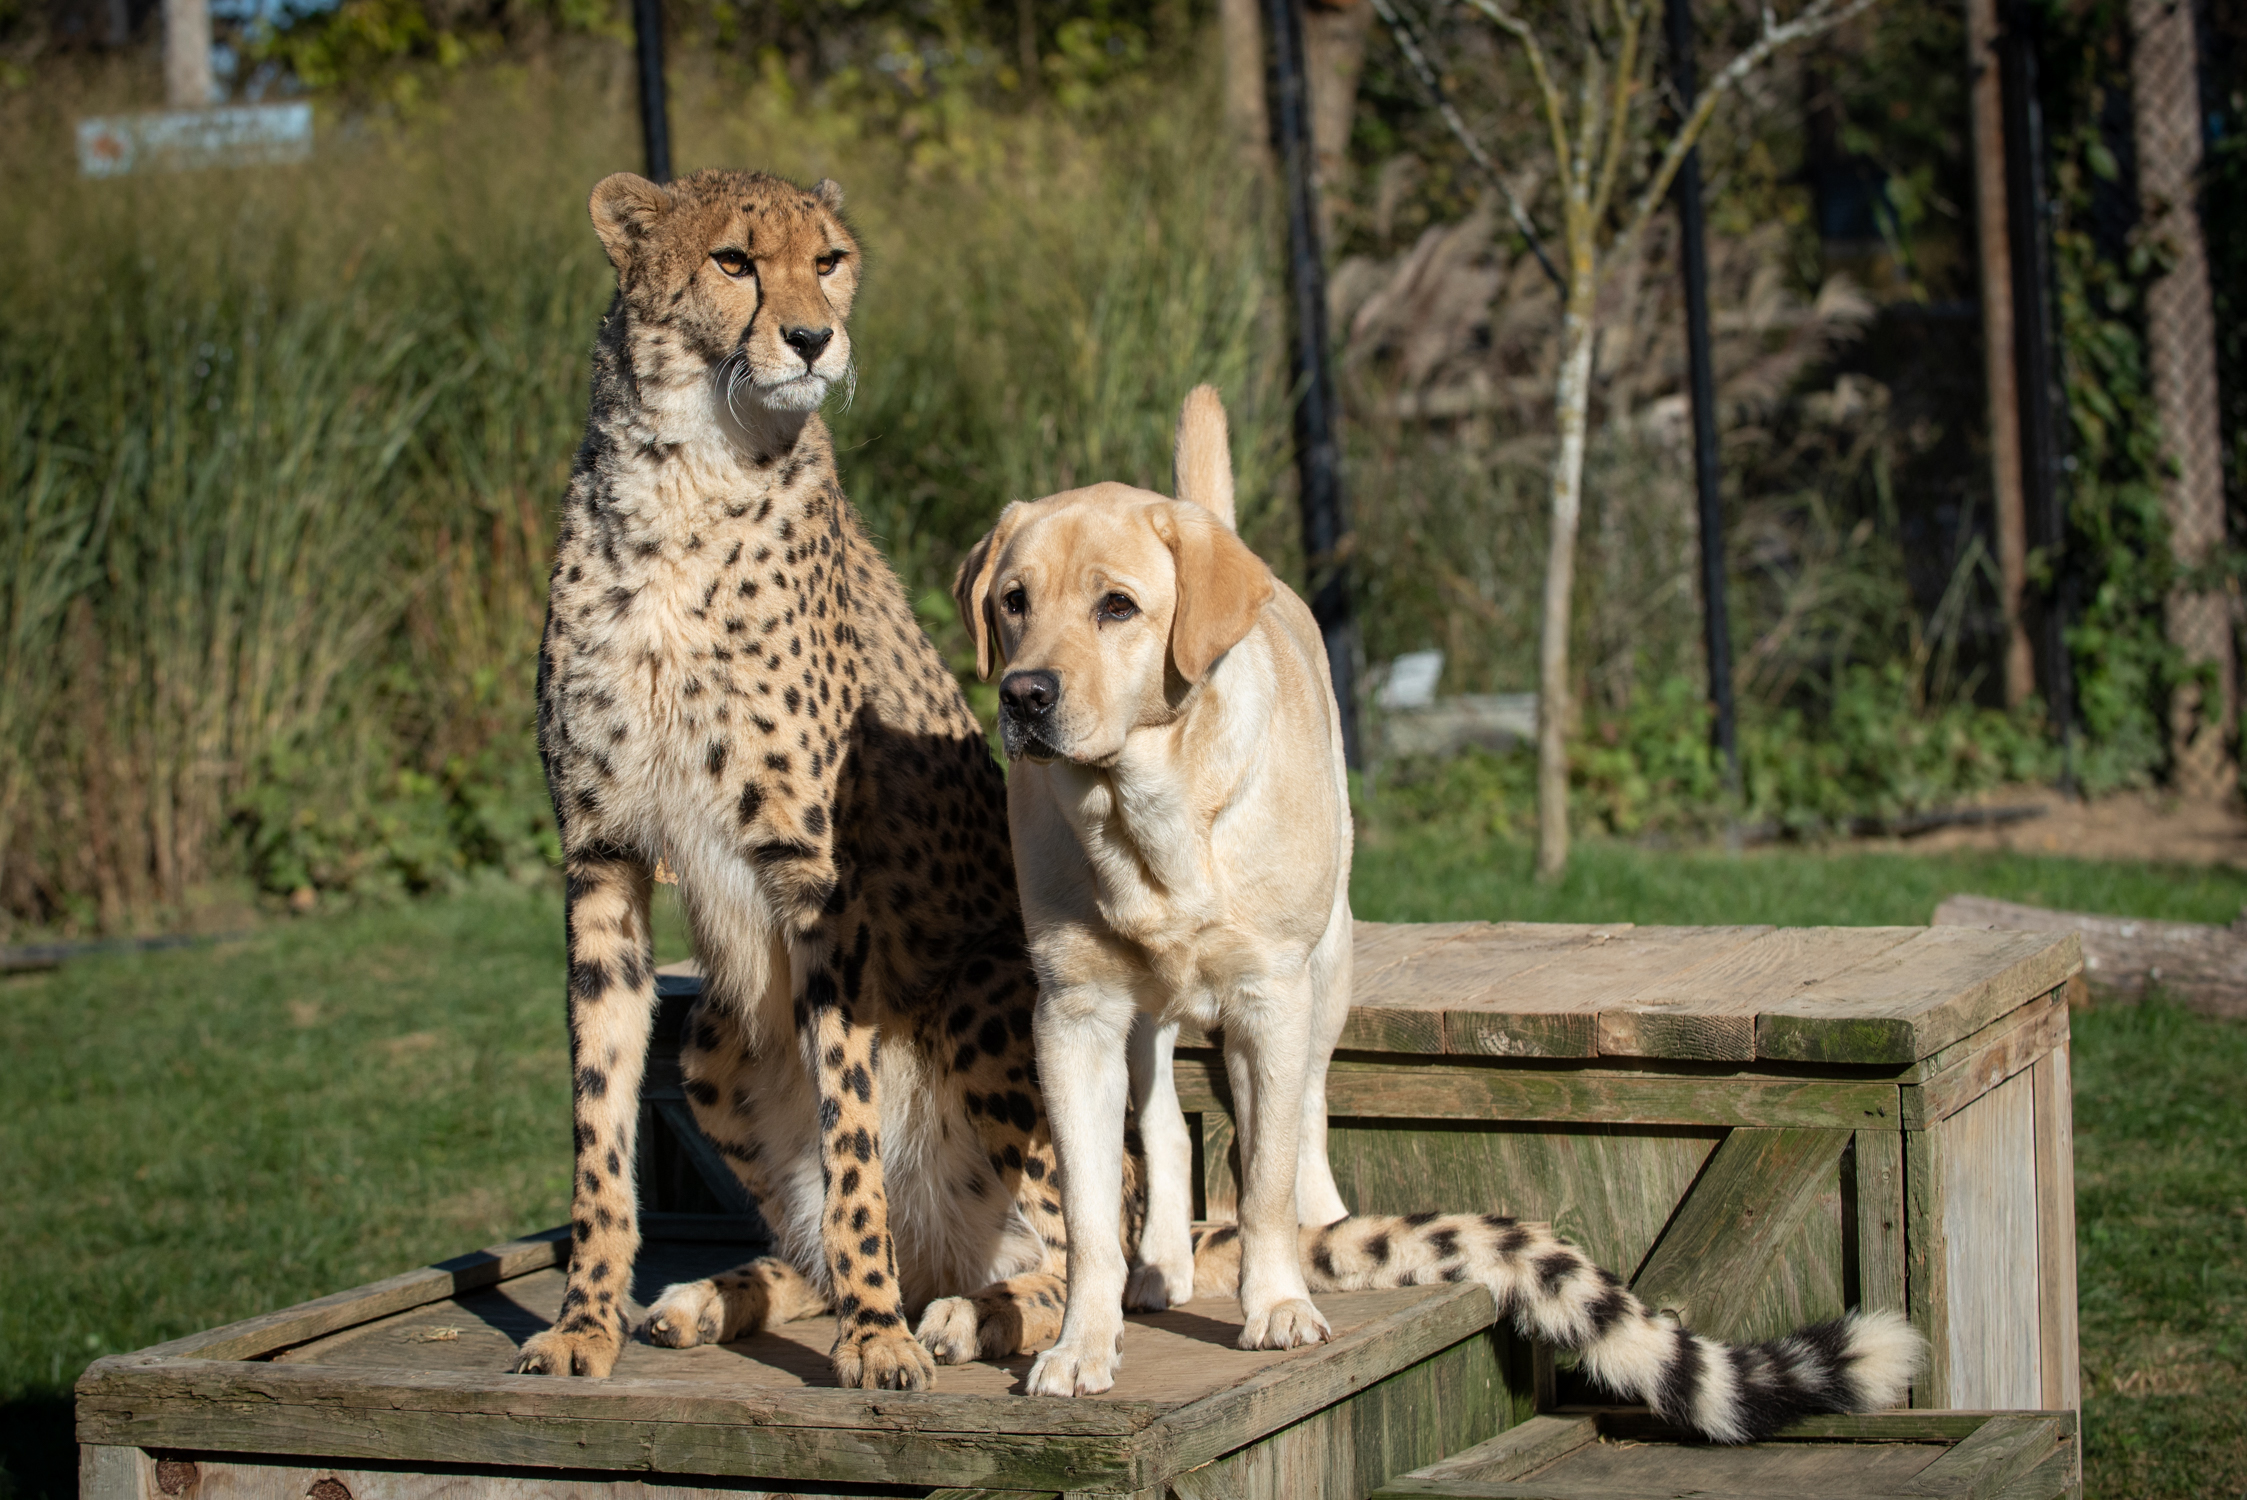 PHOTO: In this undated photo from Columbus Zoo, a cheetah and a Labrador retriever are shown.